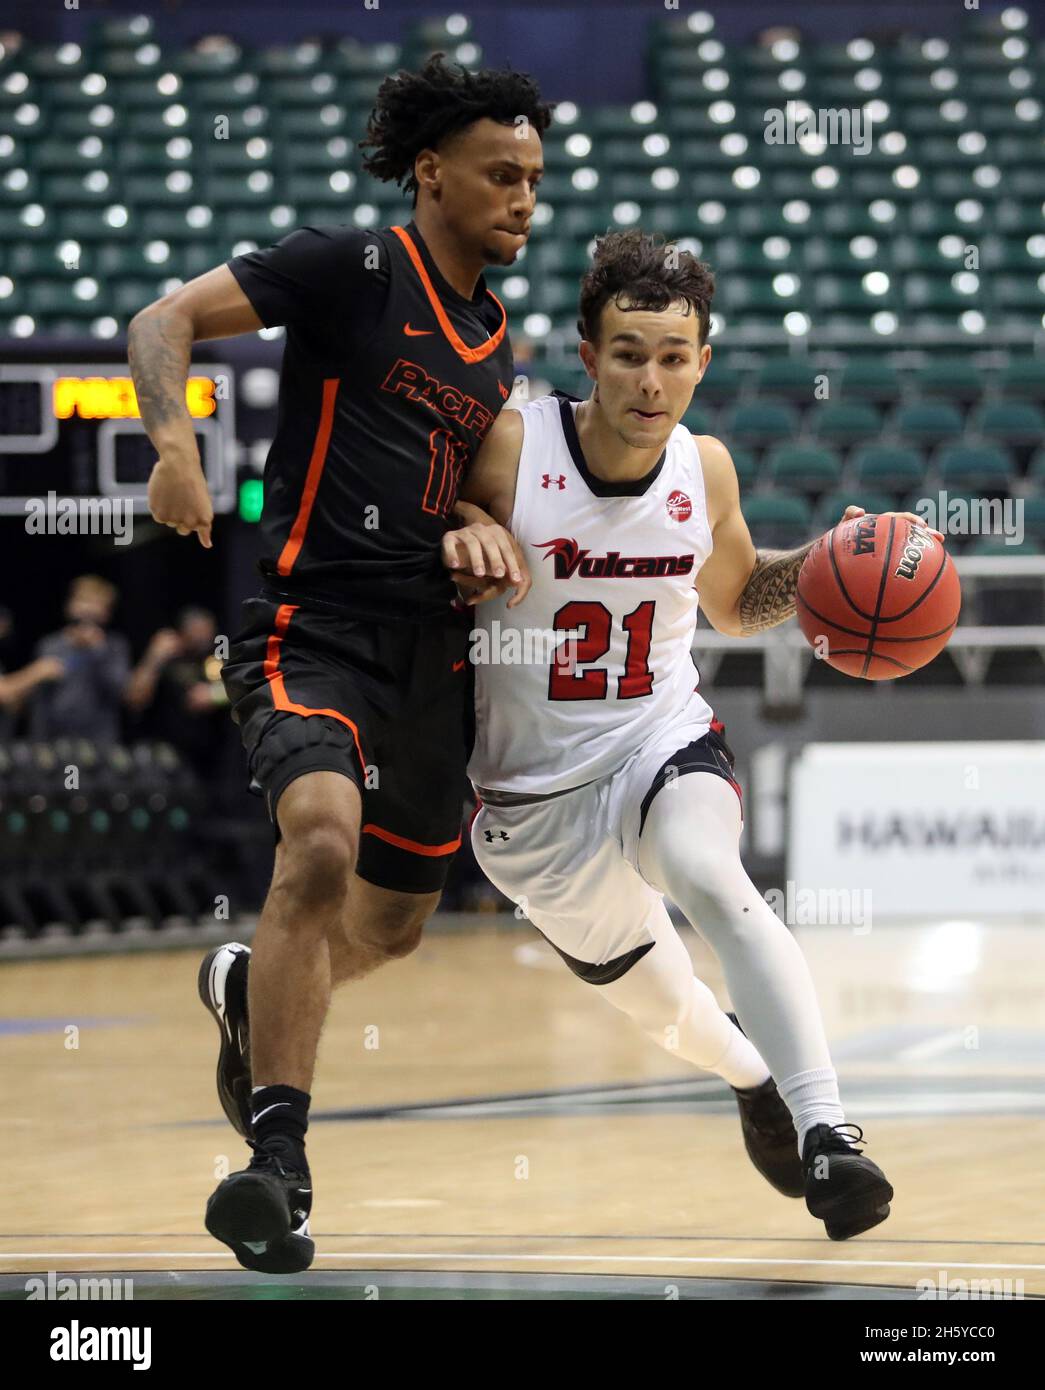 Honolulu, USA. 11th Nov, 2021. November 11, 2021 - Hawaii-Hilo Vulcans guard Kameron Ng #21 drives the lane against Pacific Tigers guard Jaden Byers #11 during a game between the Hawaii-Hilo Vulcans and the Pacific Tigers during the Rainbow Classic at the SimpliFi Arena at the Stan Sheriff Center in Honolulu, HI - Michael Sullivan/CSM Credit: Cal Sport Media/Alamy Live News Stock Photo